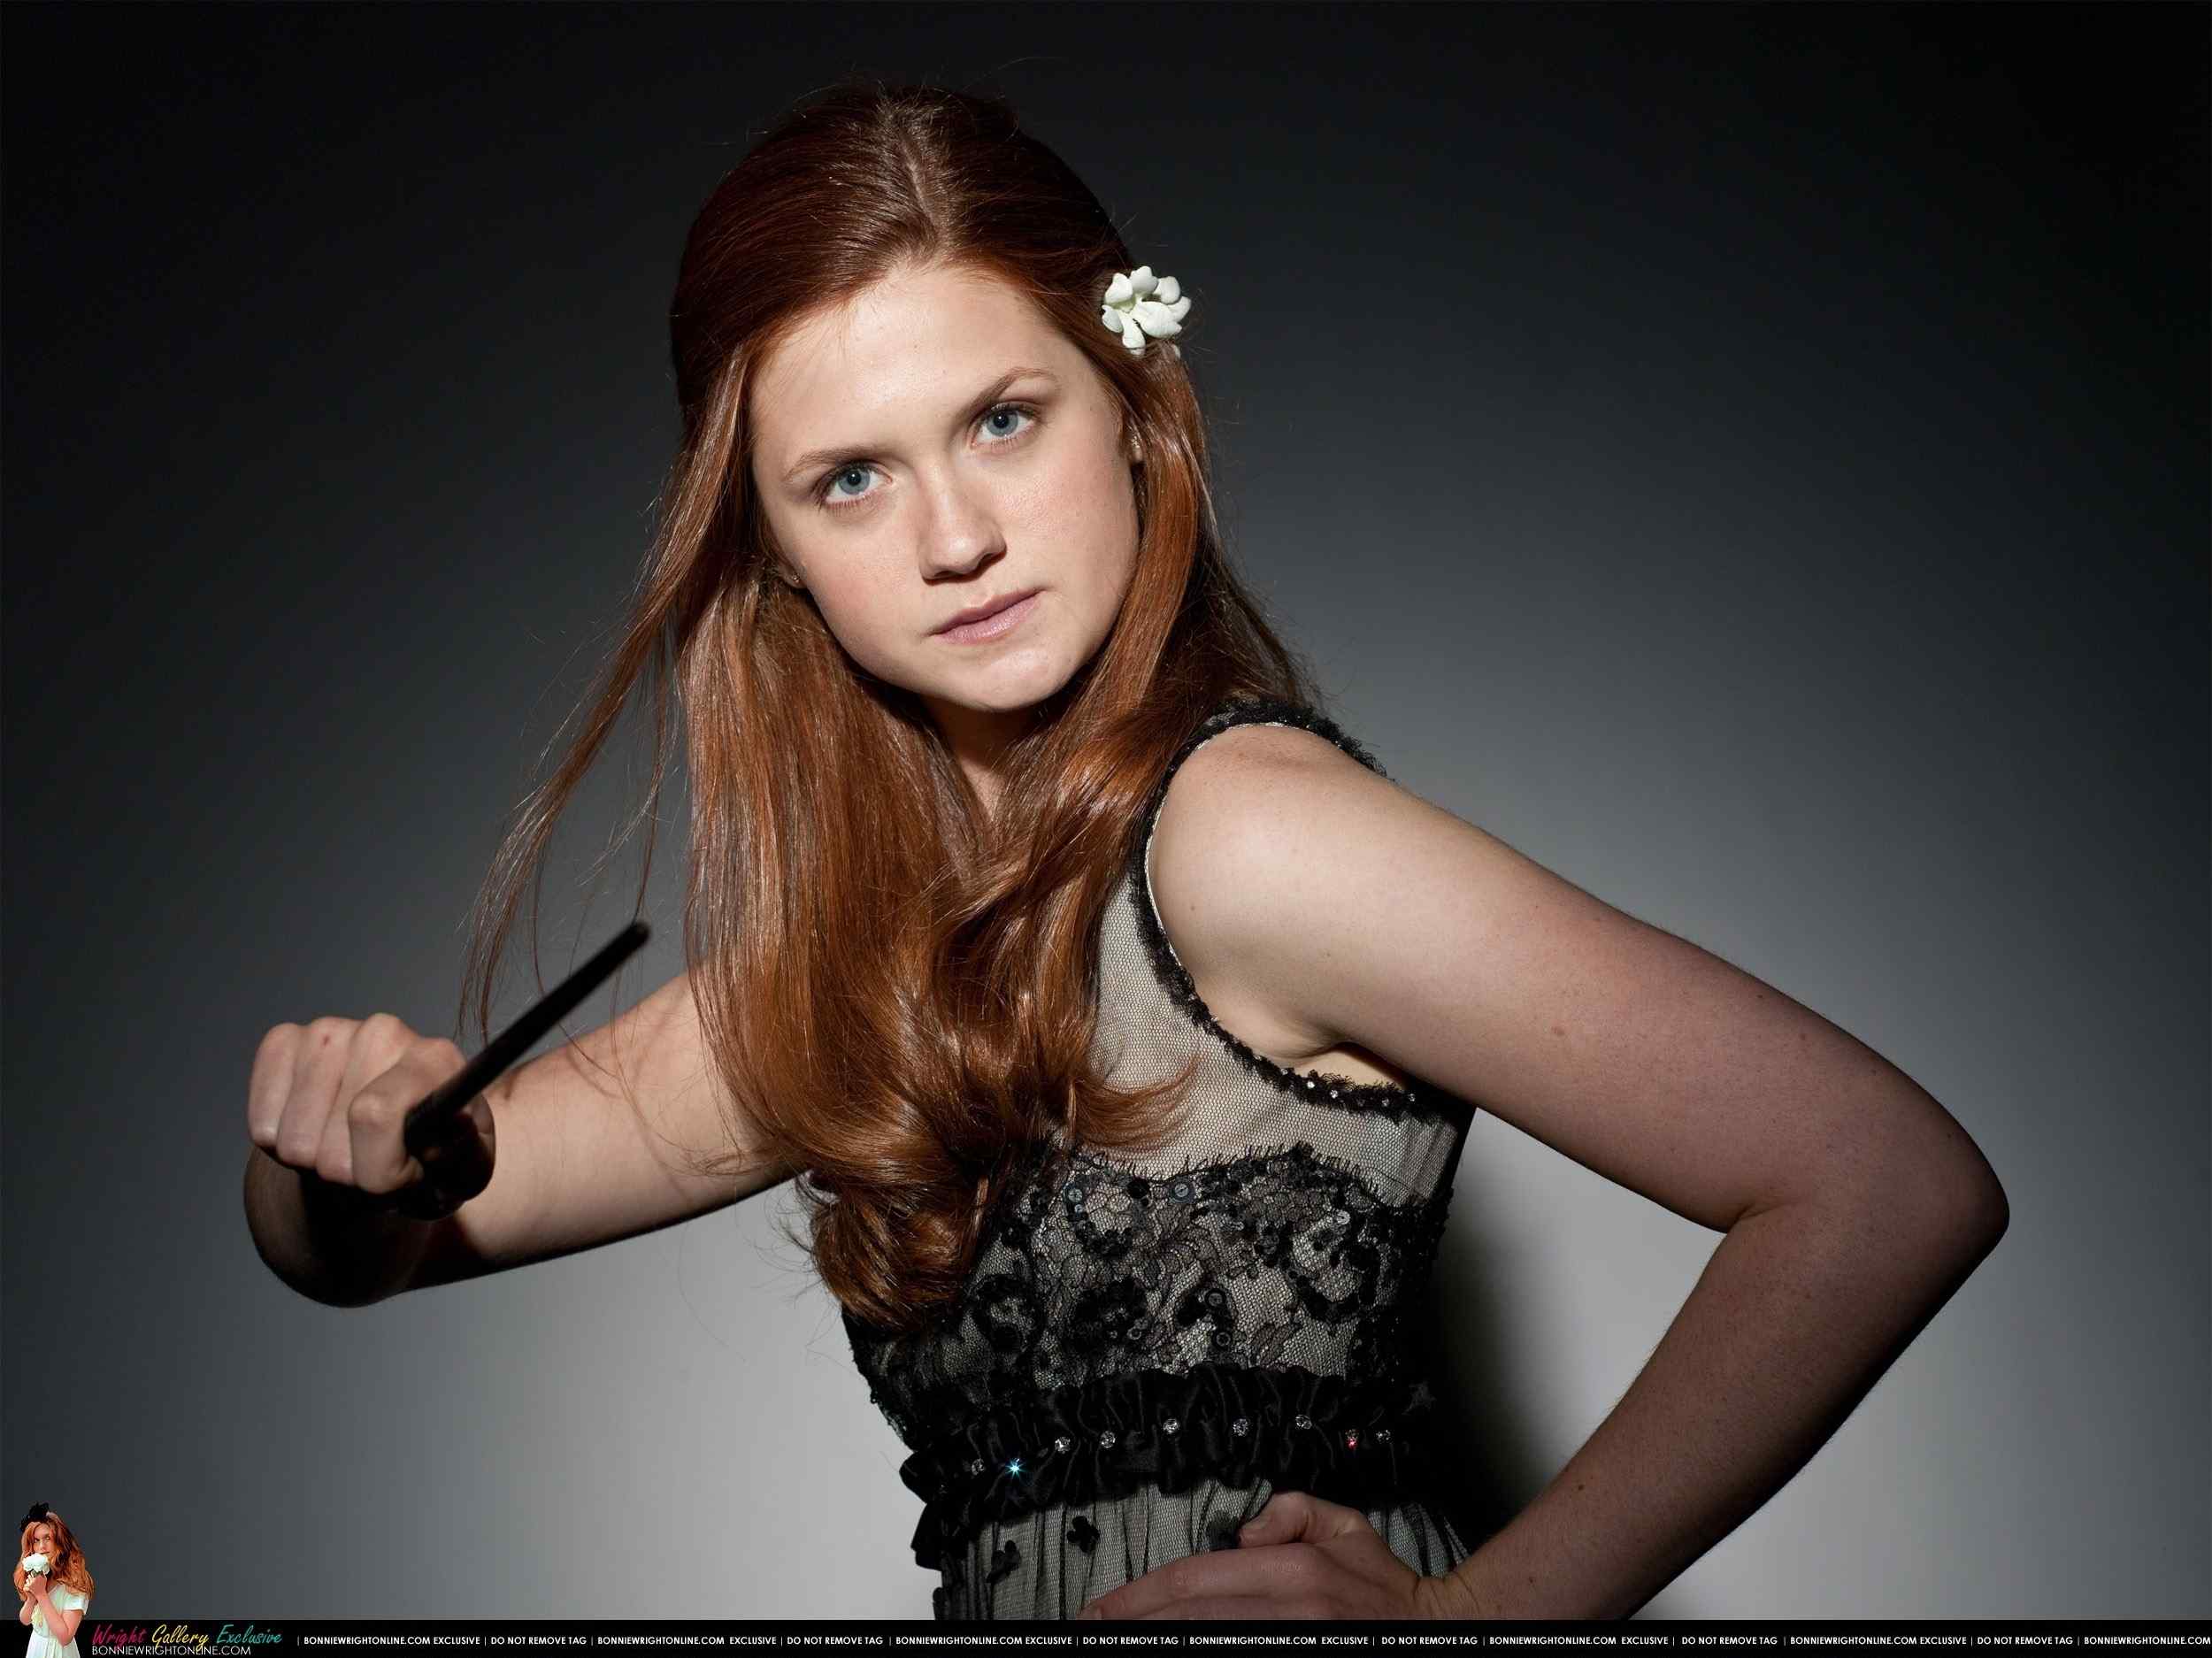 60+ Sexy Bonnie Wright Boobs Pictures Are Going To Make You Want Her Badly 449